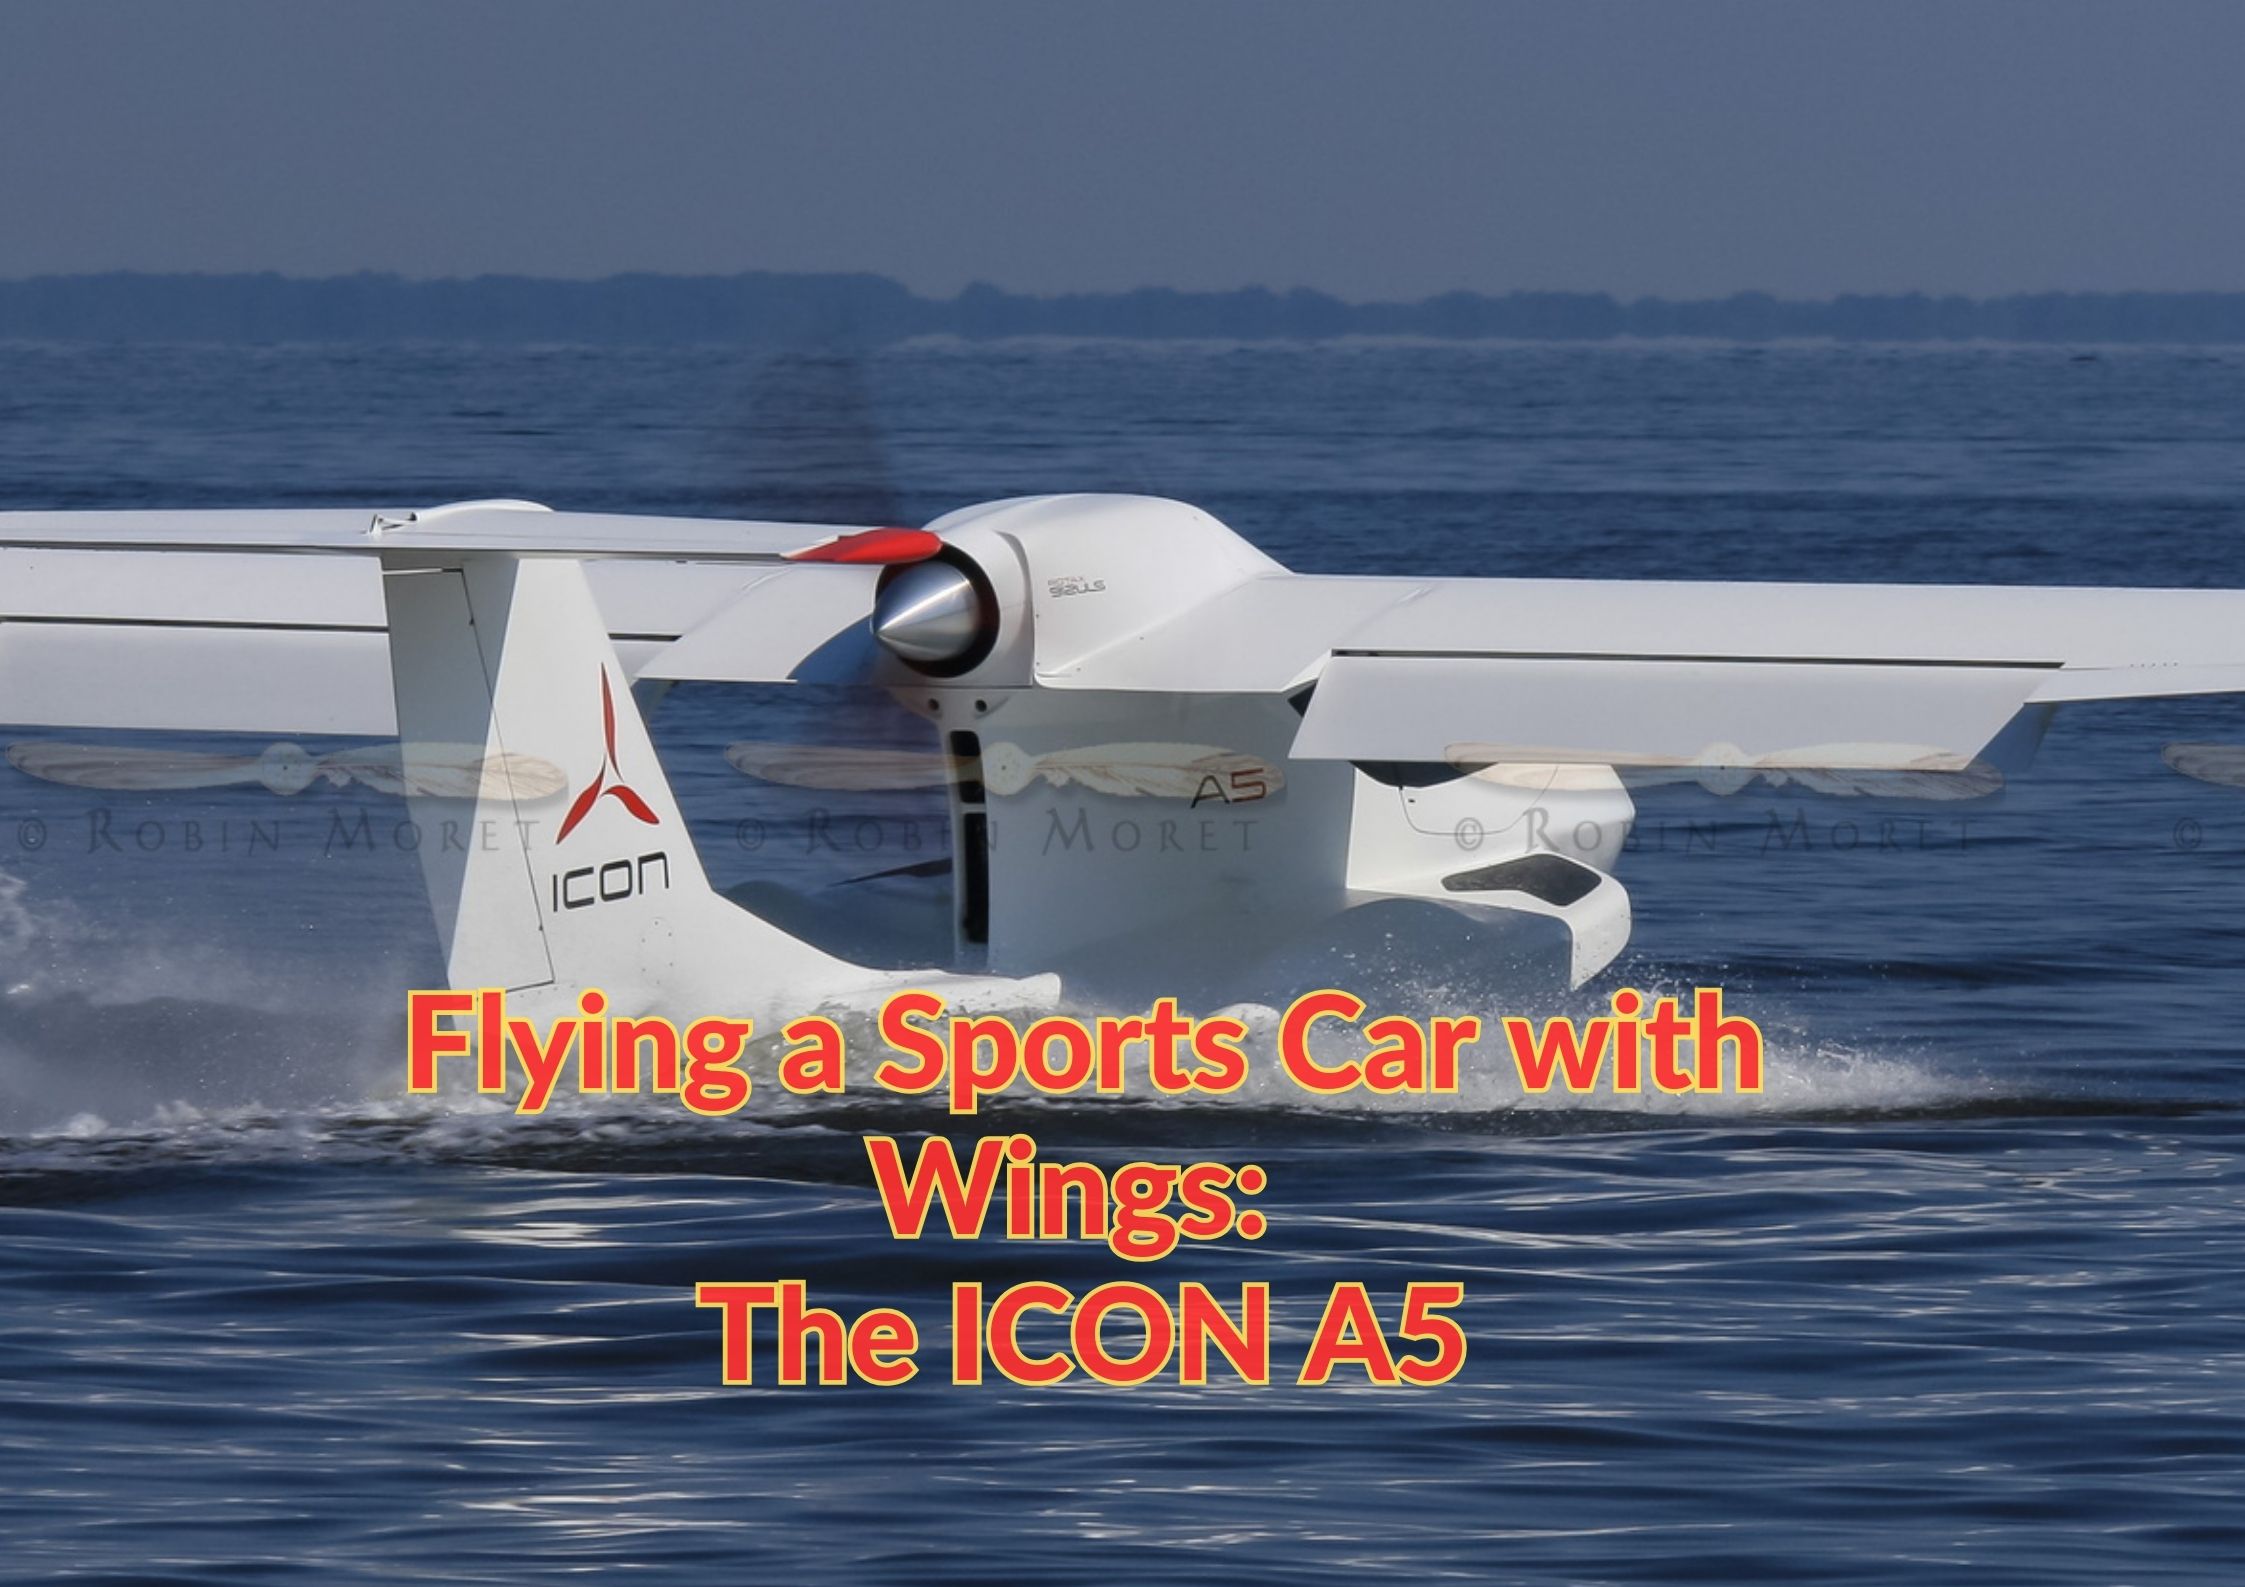 Flying a Sports Car with Wings: The ICON A5